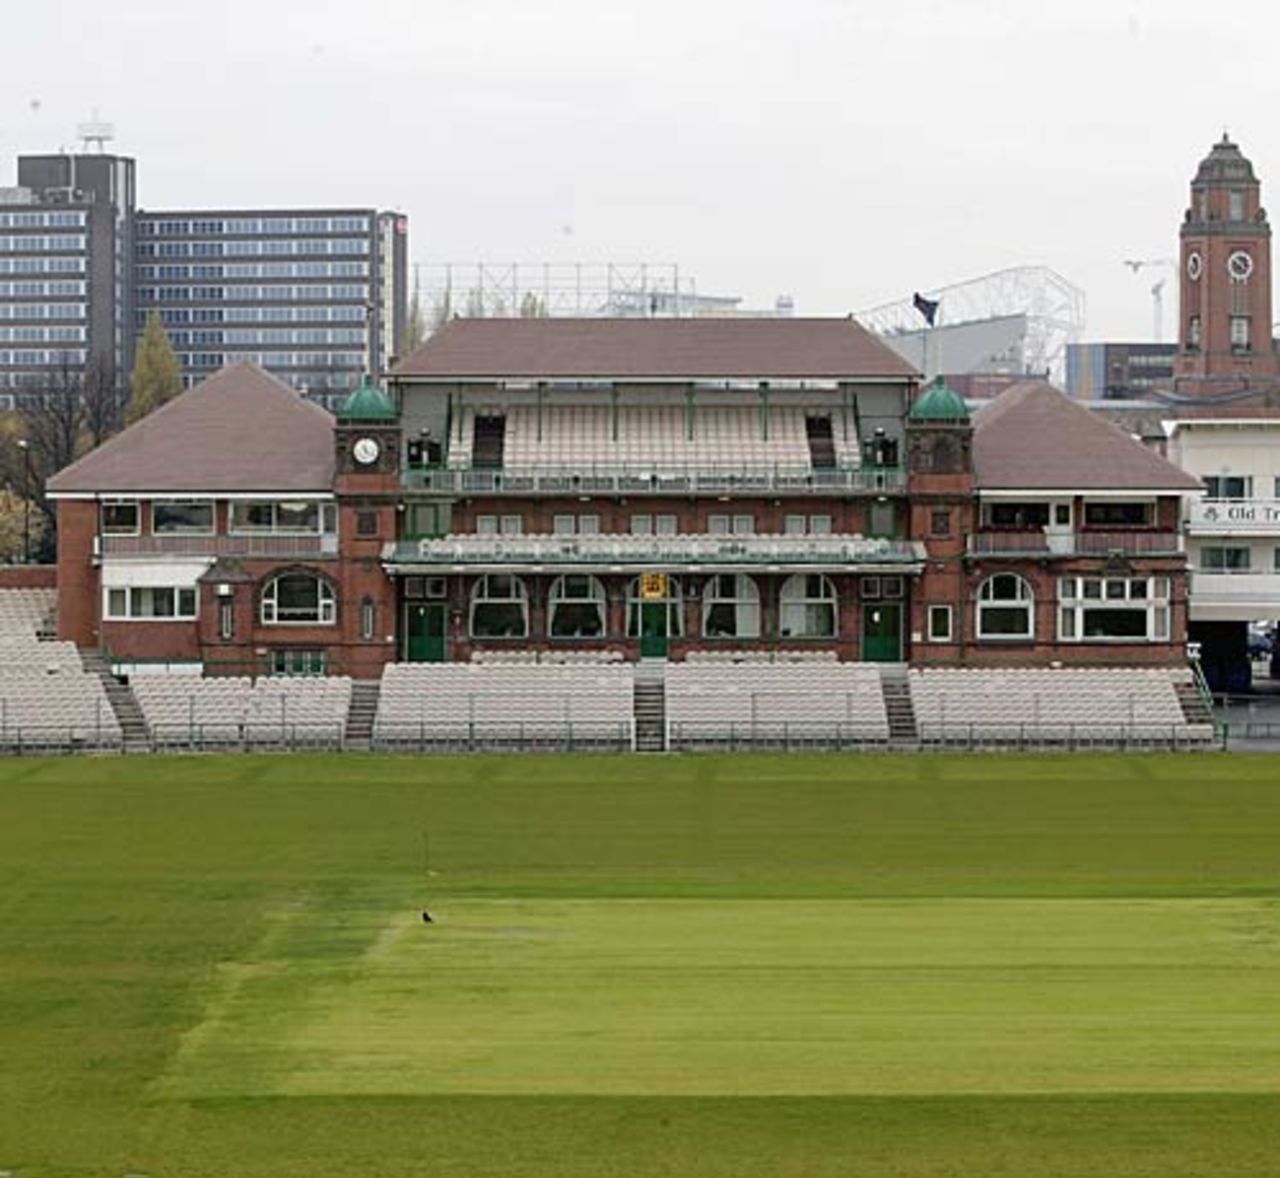 The Old Trafford pavilion out of season, November 2003